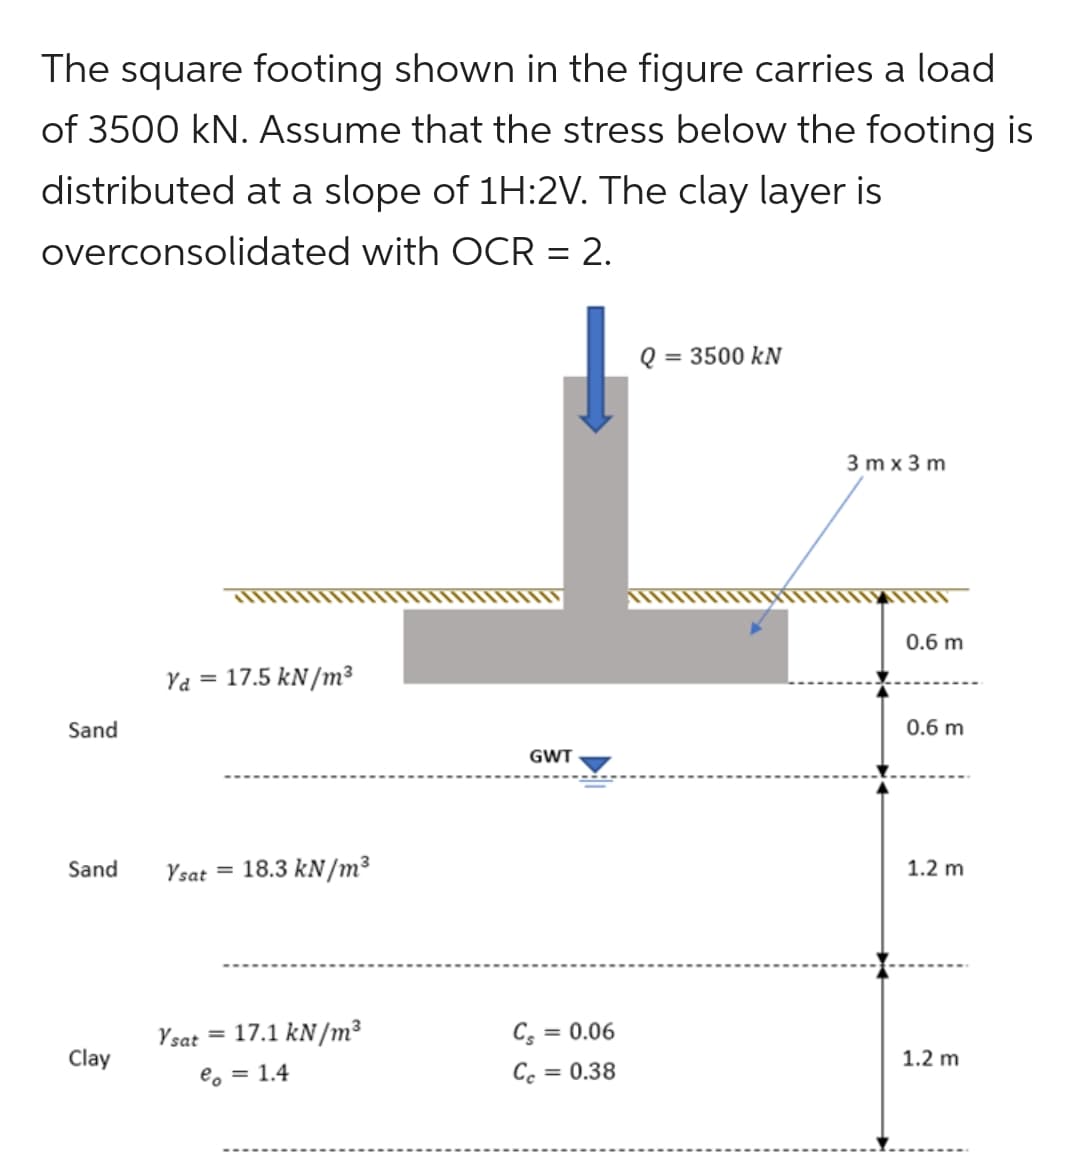 The square footing shown in the figure carries a load
of 3500 kN. Assume that the stress below the footing is
distributed at a slope of 1H:2V. The clay layer is
overconsolidated with OCR = 2.
= 3500 kN
3 m x 3 m
0.6 m
Ya =
17.5 kN/m³
Sand
0.6 m
GWT
Sand
Ysat =
18.3 kN/m³
1.2 m
Ysat = 17.1 kN/m³
= 0.06
Clay
1.2 m
e, = 1.4
Cc = 0.38
